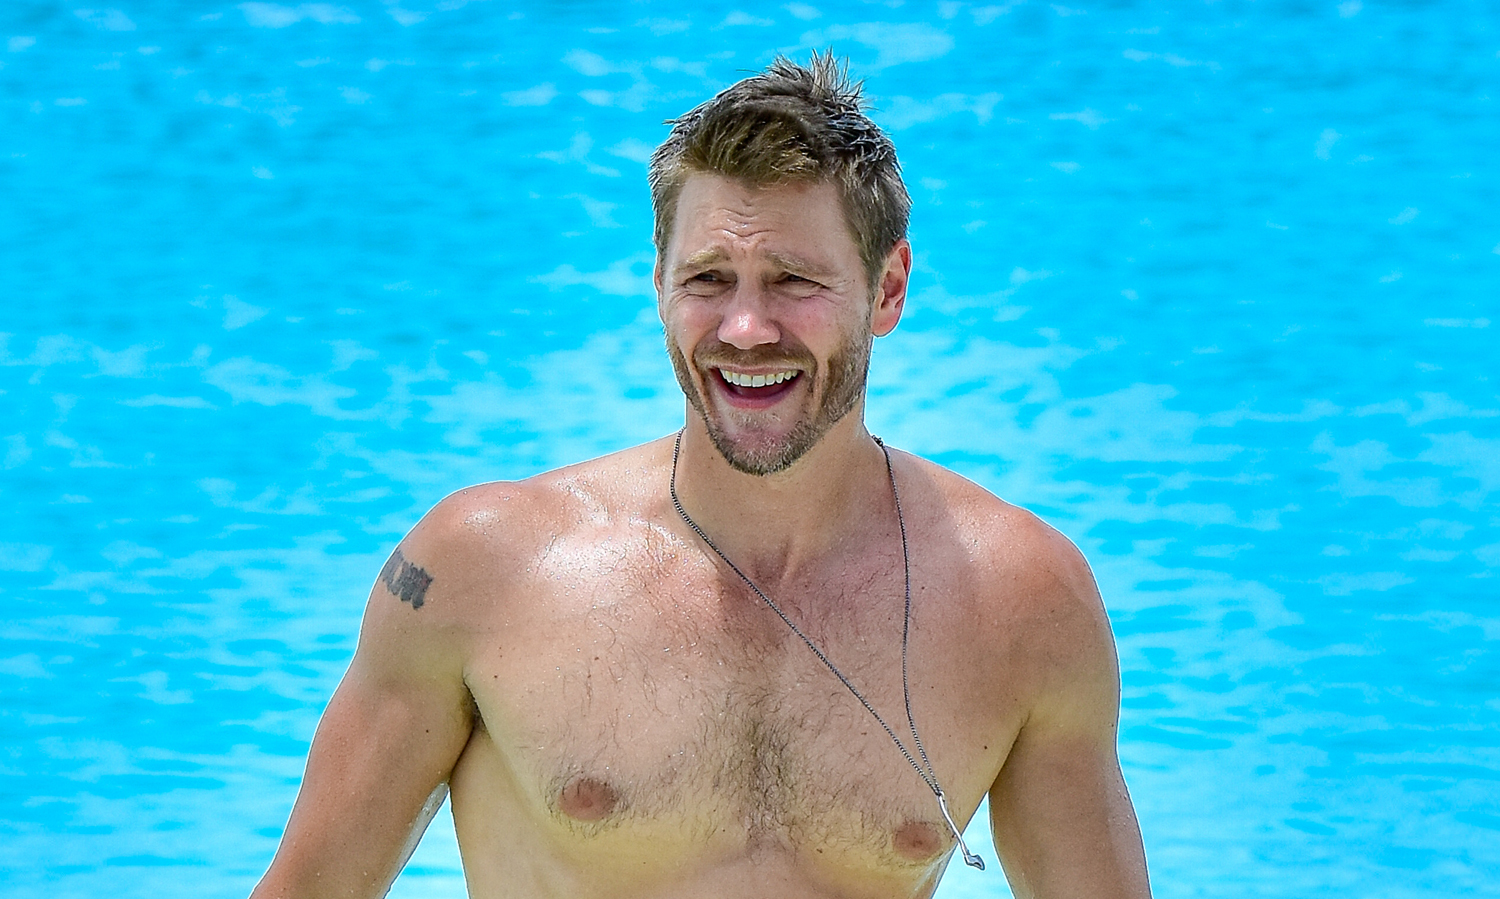 Chad Michael Murray Goes Shirtless During Trip to Turks & Caicos.